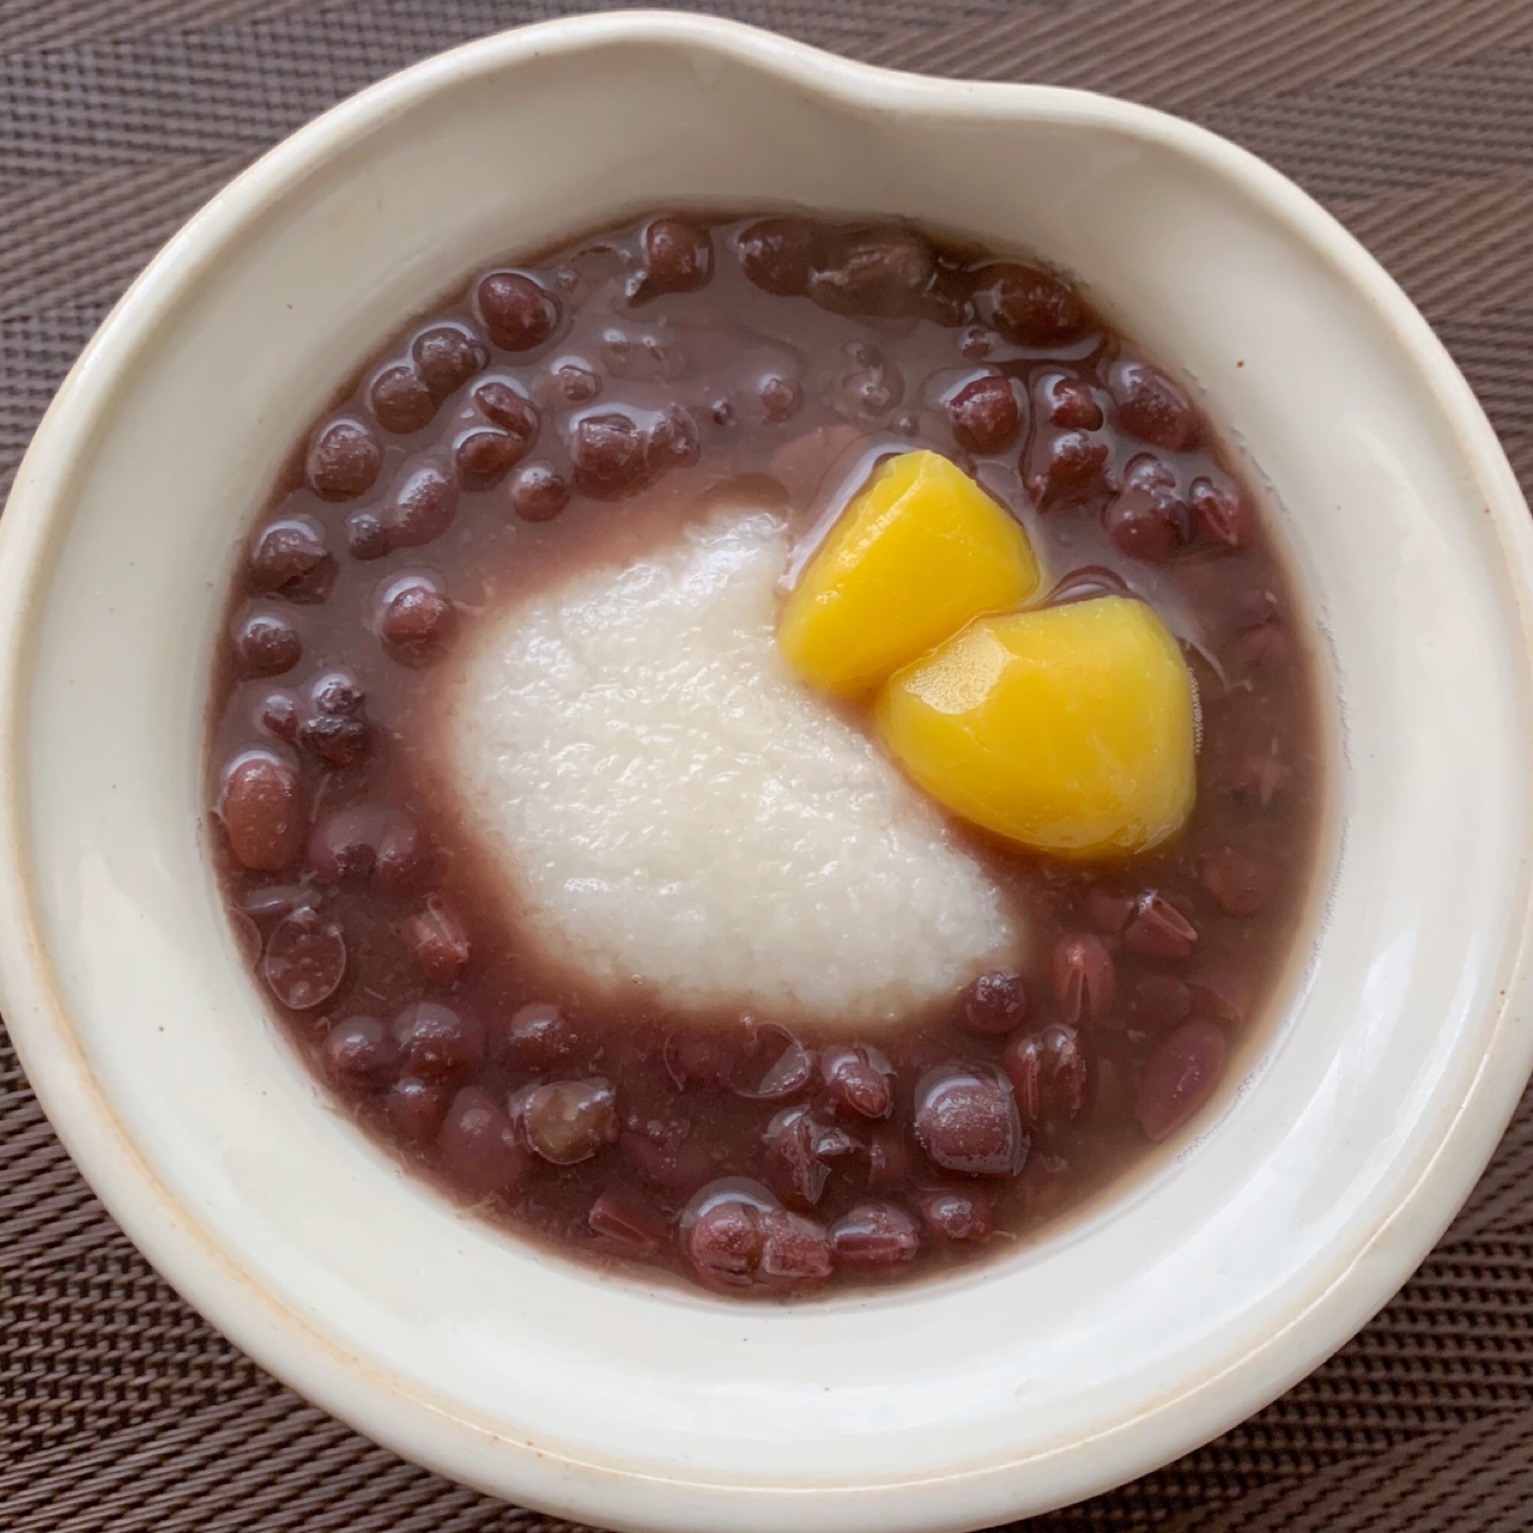 Zenzai is a dessert made with azuki(red beans), sugar, and mochi(rice cake).